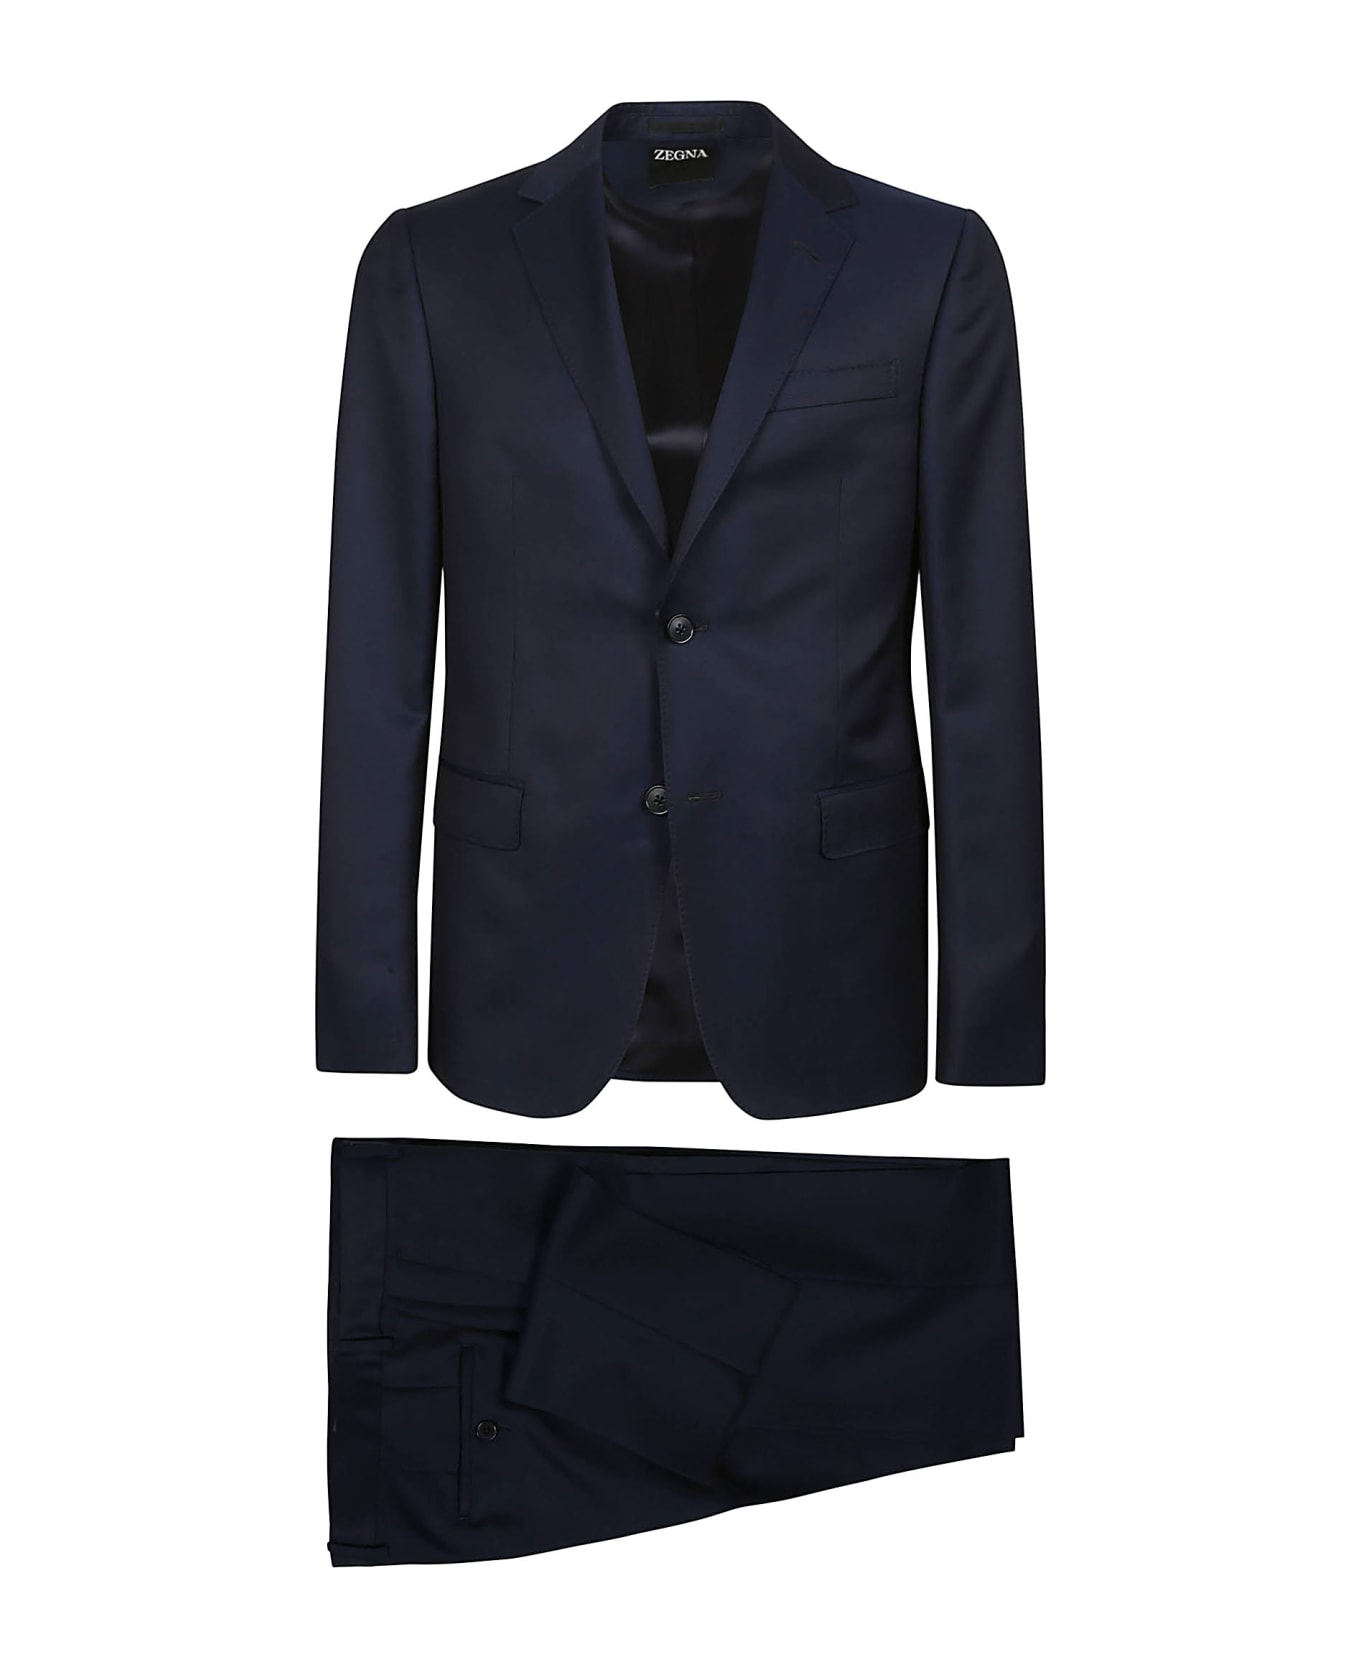 Zegna Lux Tailoring Suit - NAVY スーツ